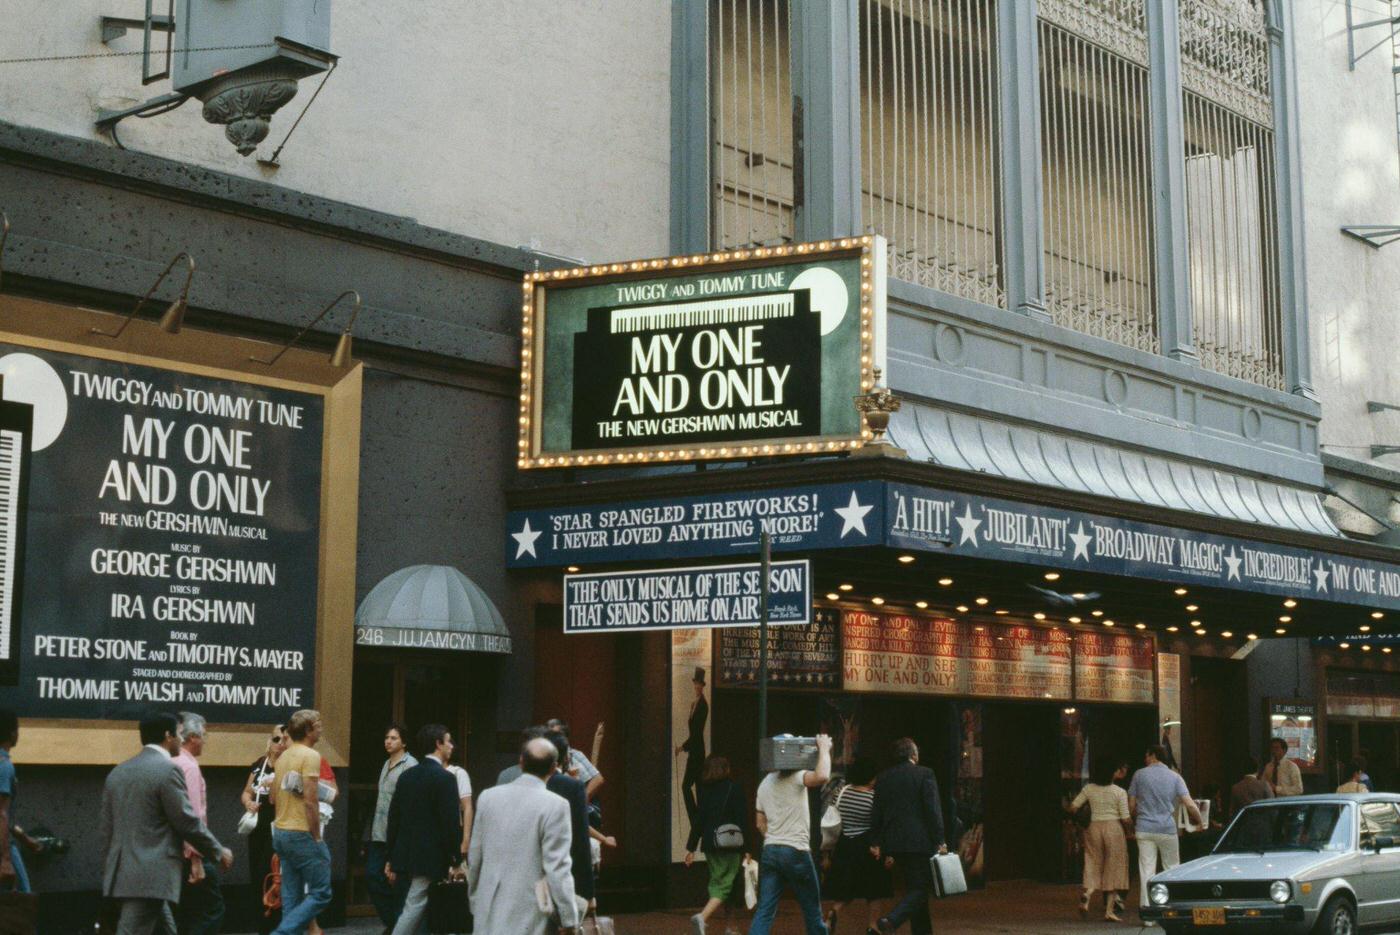 St James Theatre Staging 'My One And Only', Broadway, Midtown Manhattan, 1985